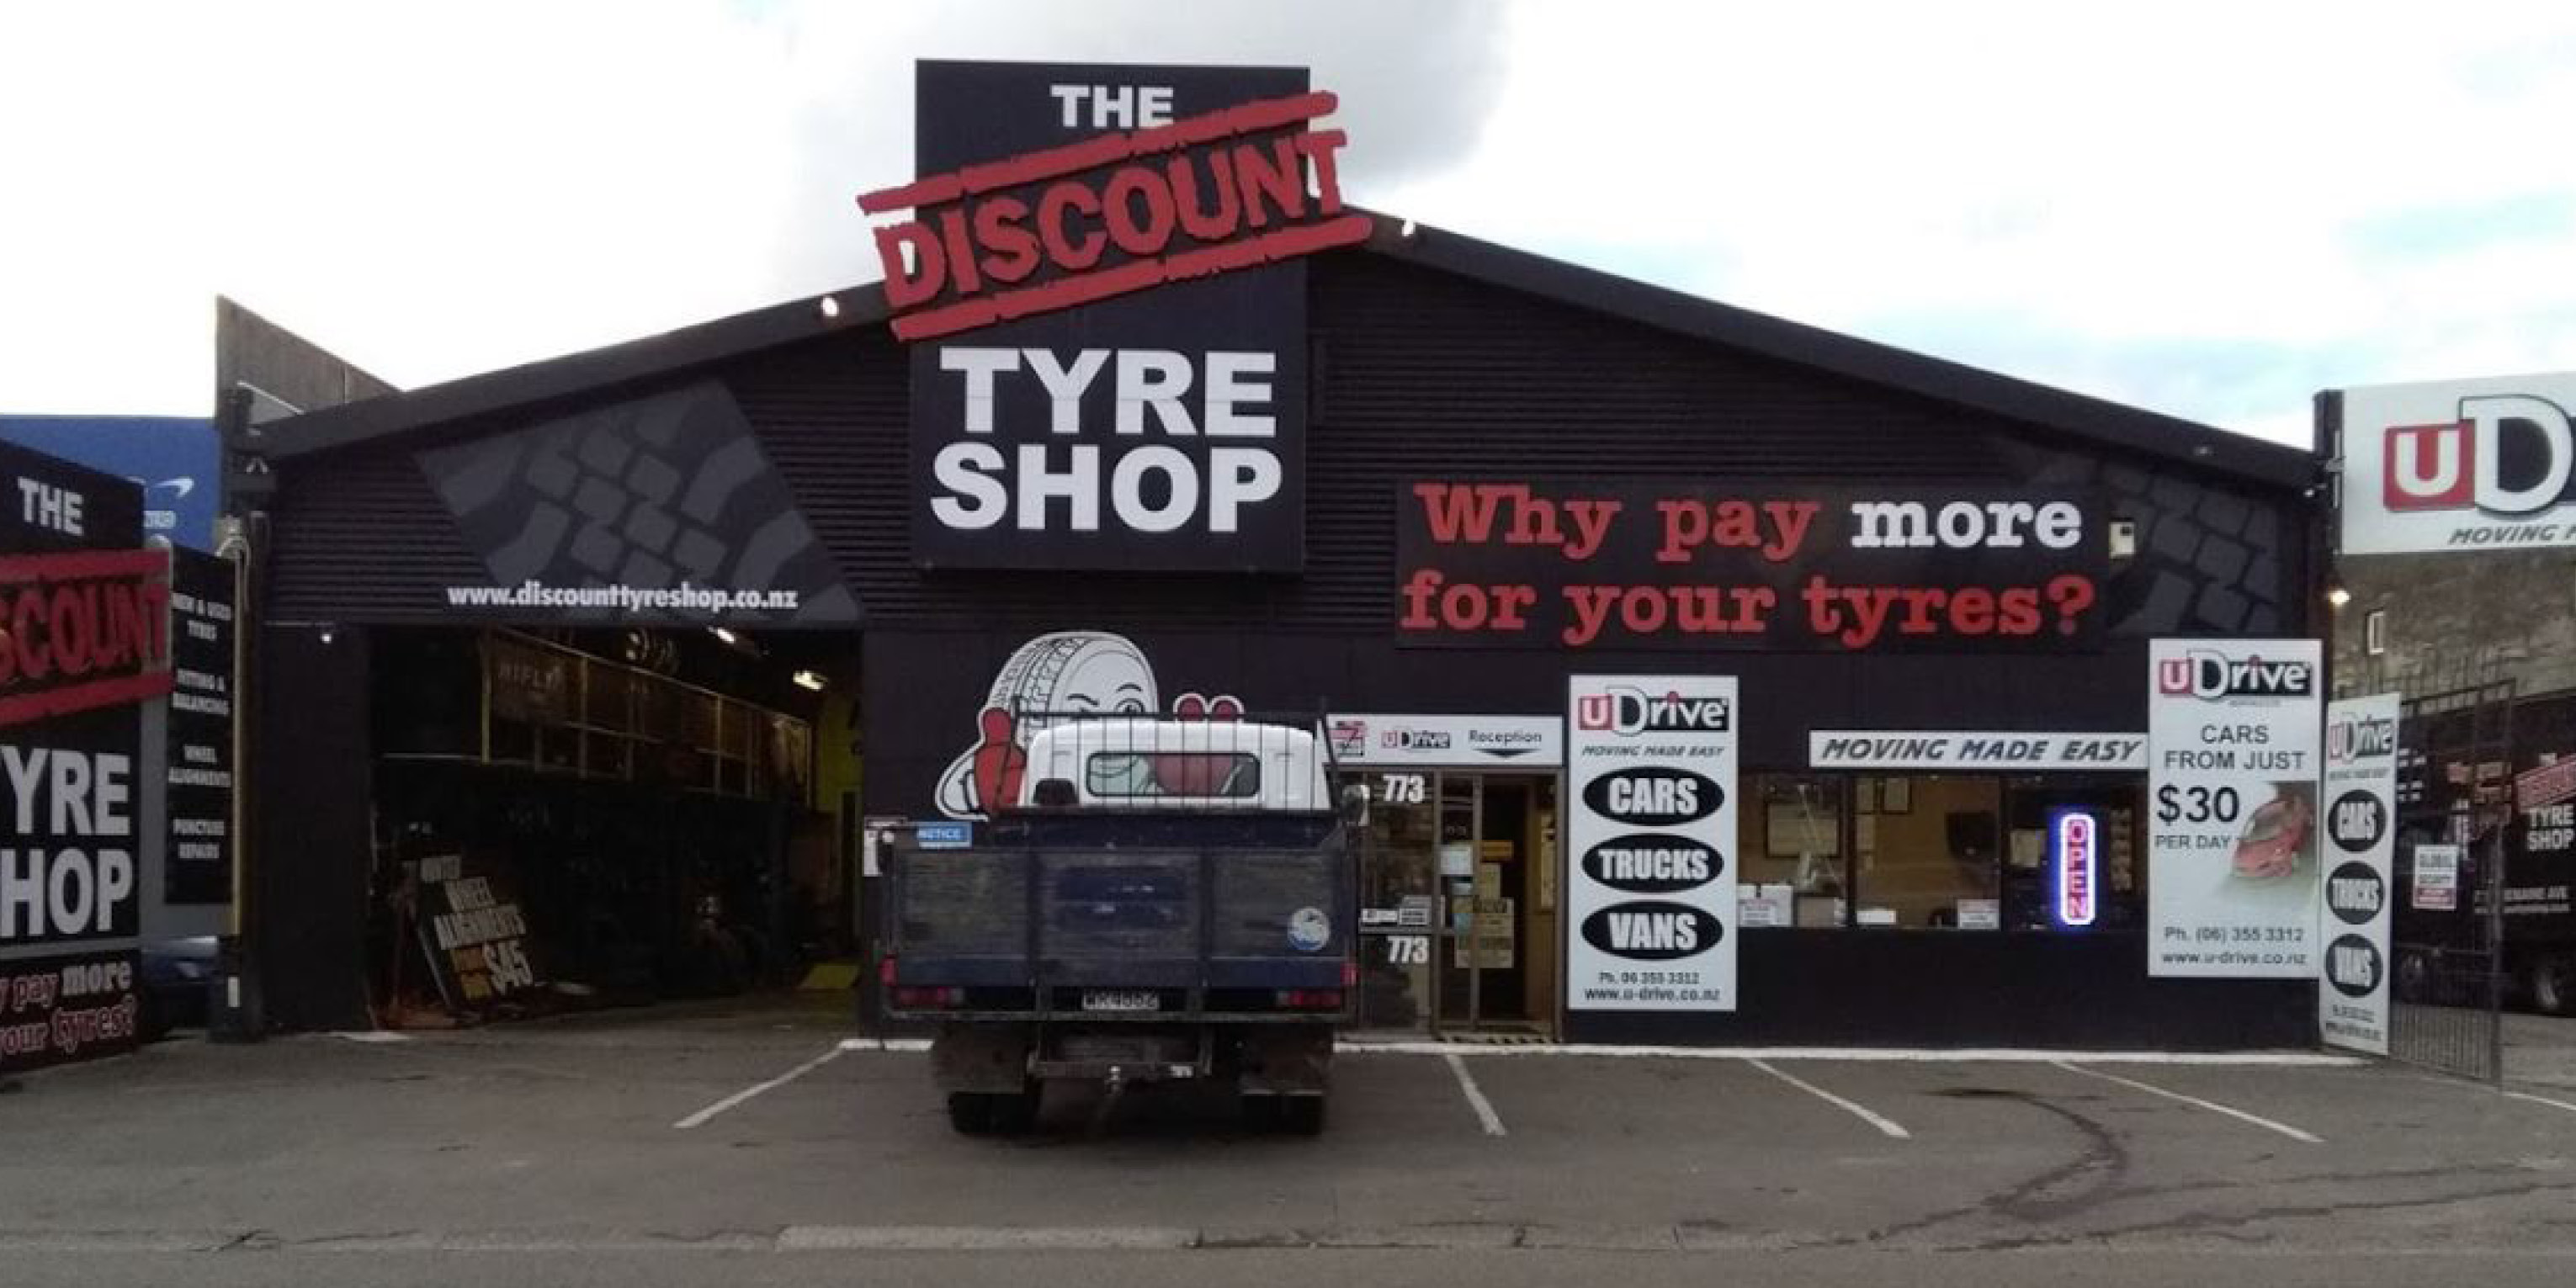 The Discount Tyre Shop